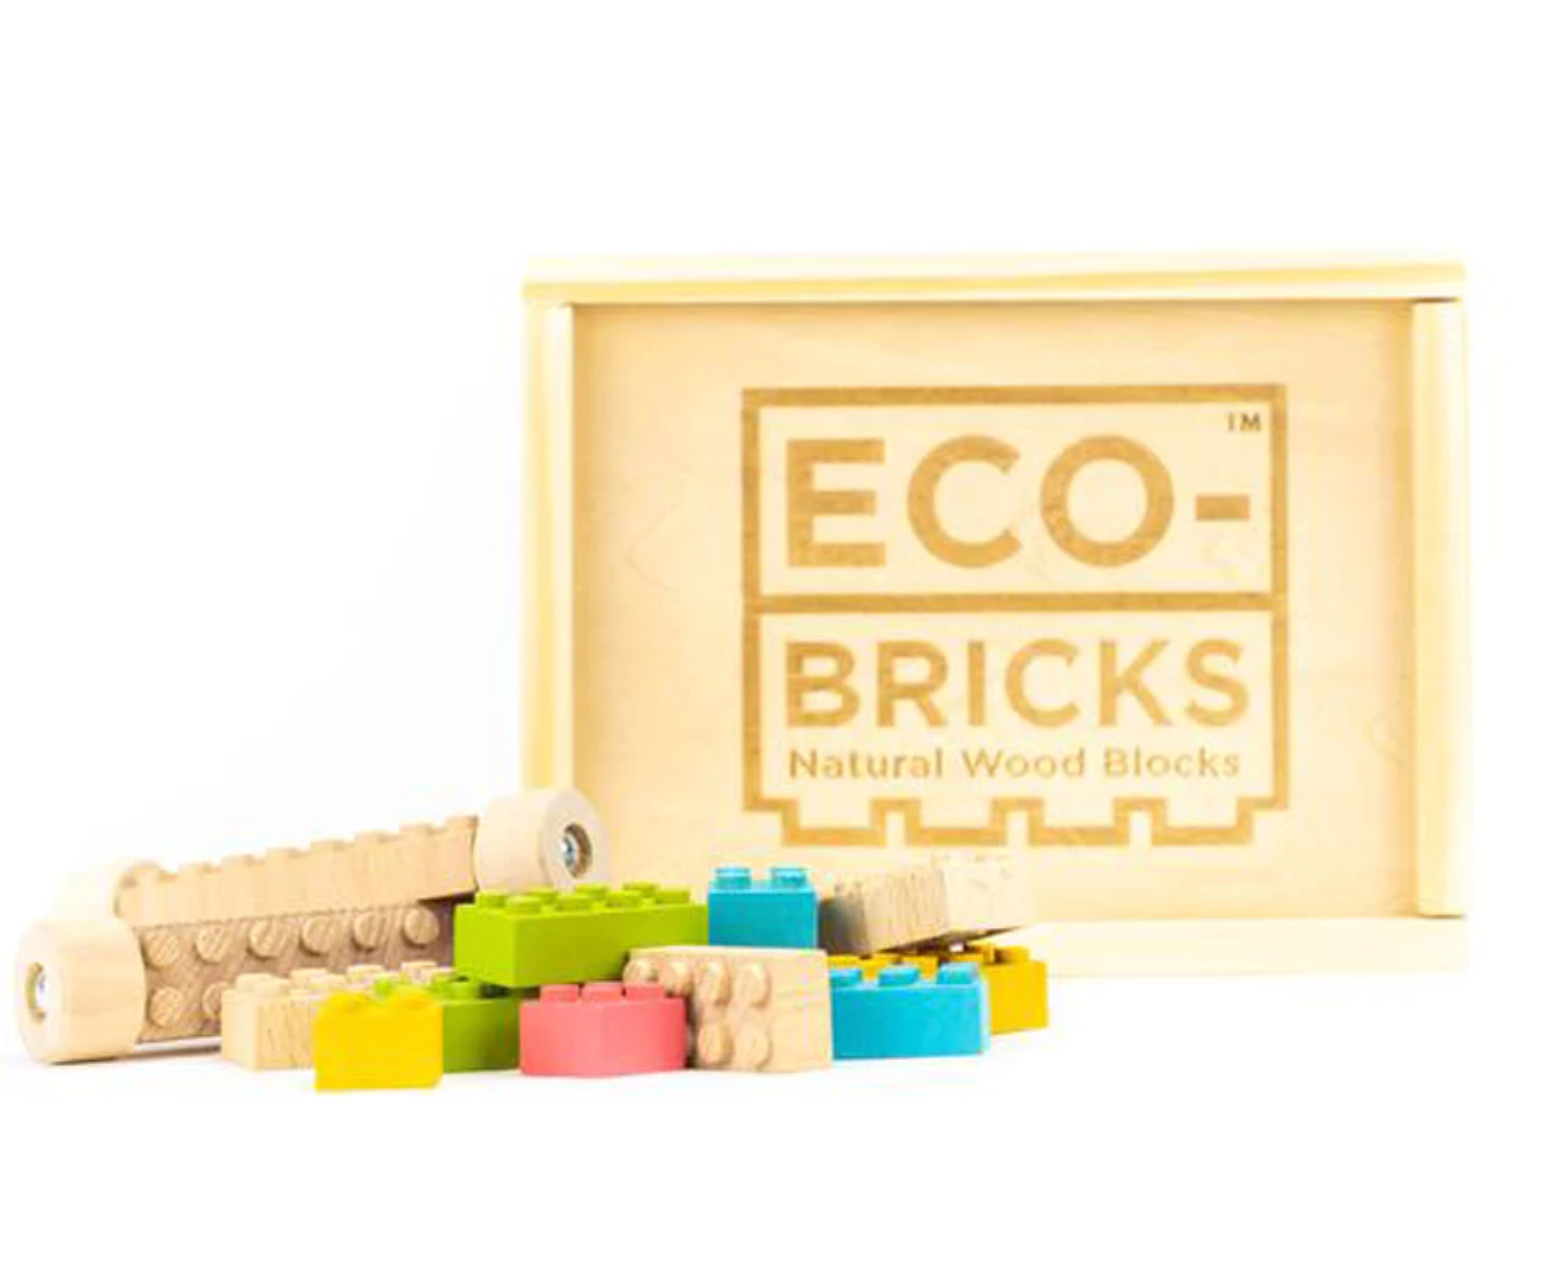 Eco-bricks Color Wooden Toy Blocks review and promo code